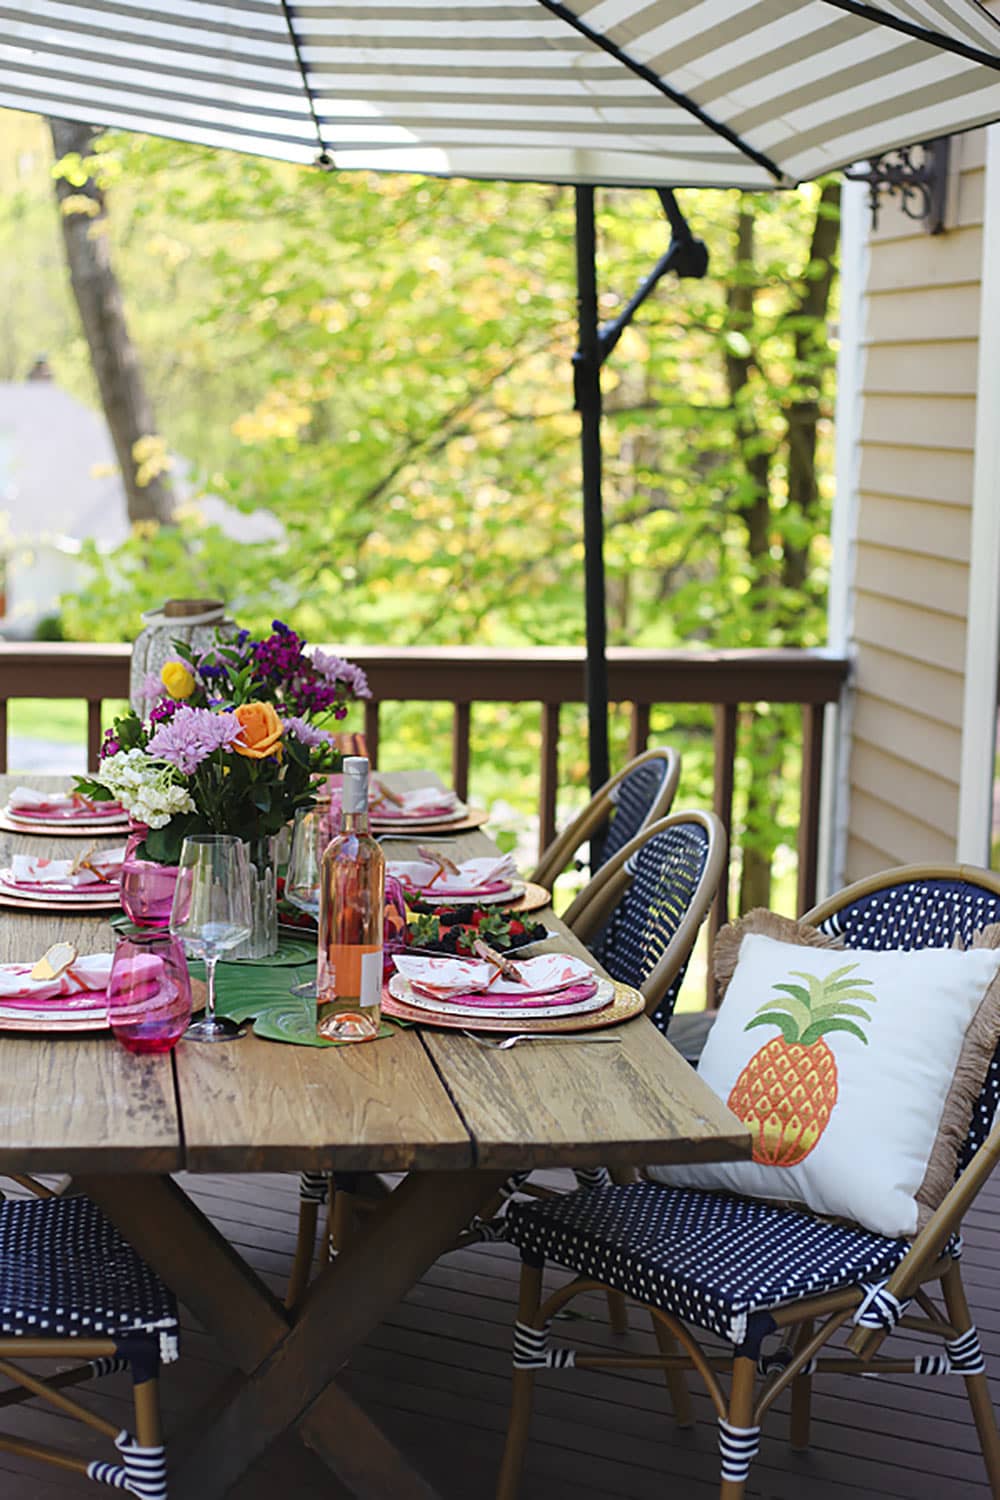 Outdoor Entertaining creating a colorful boho tablescape with pops of pink and blue. Outdoor patio furniture and decor